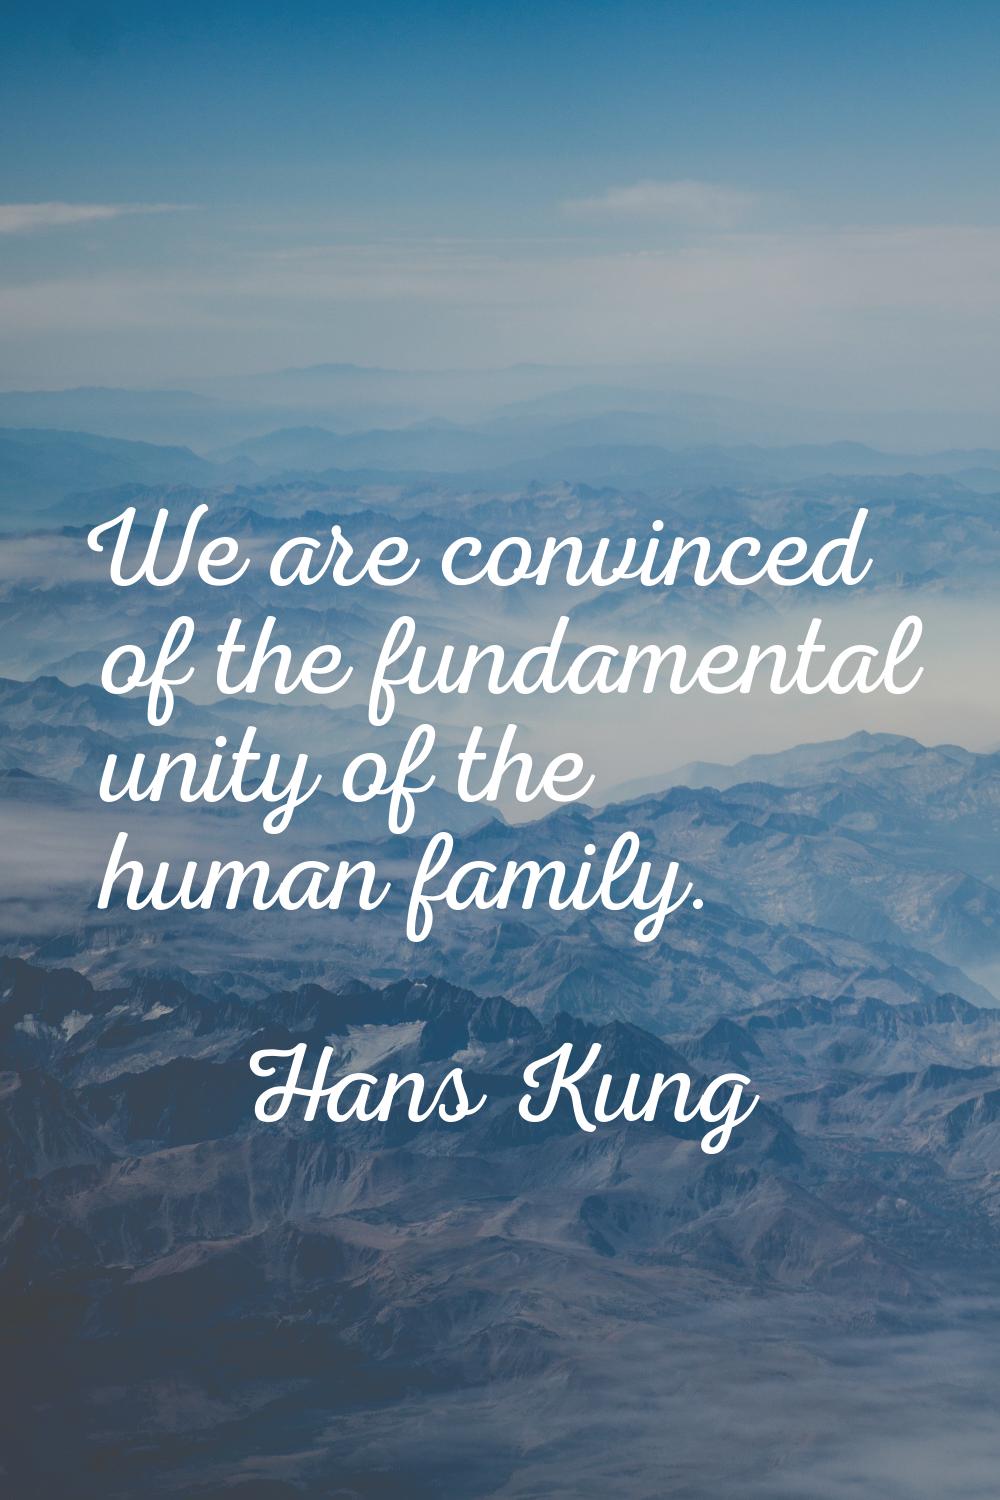 We are convinced of the fundamental unity of the human family.